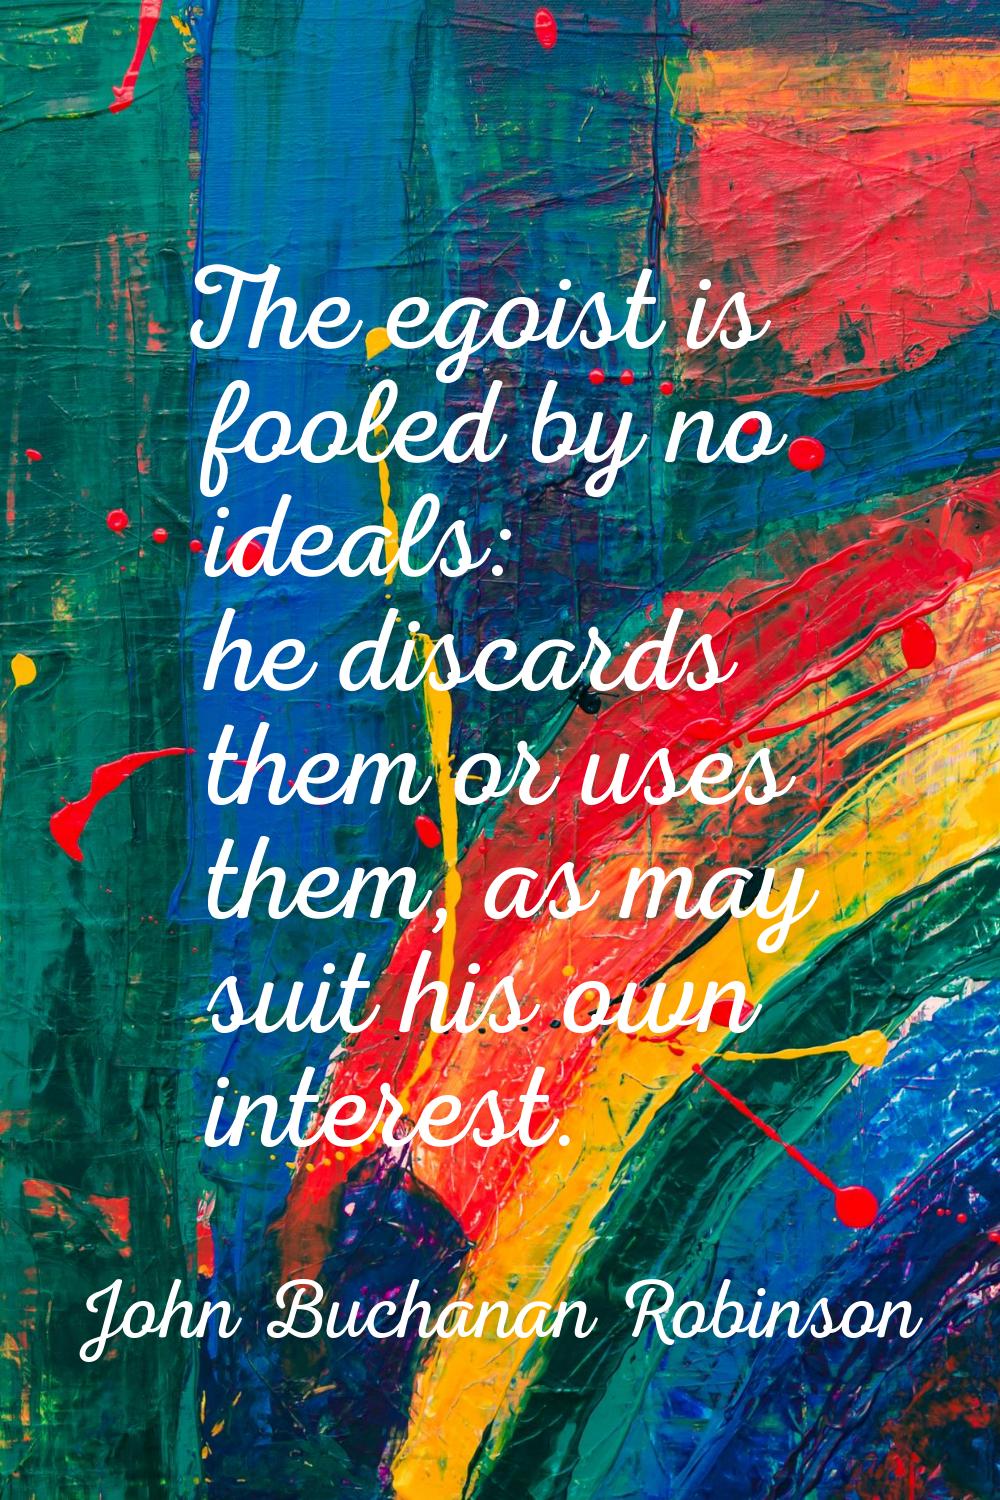 The egoist is fooled by no ideals: he discards them or uses them, as may suit his own interest.